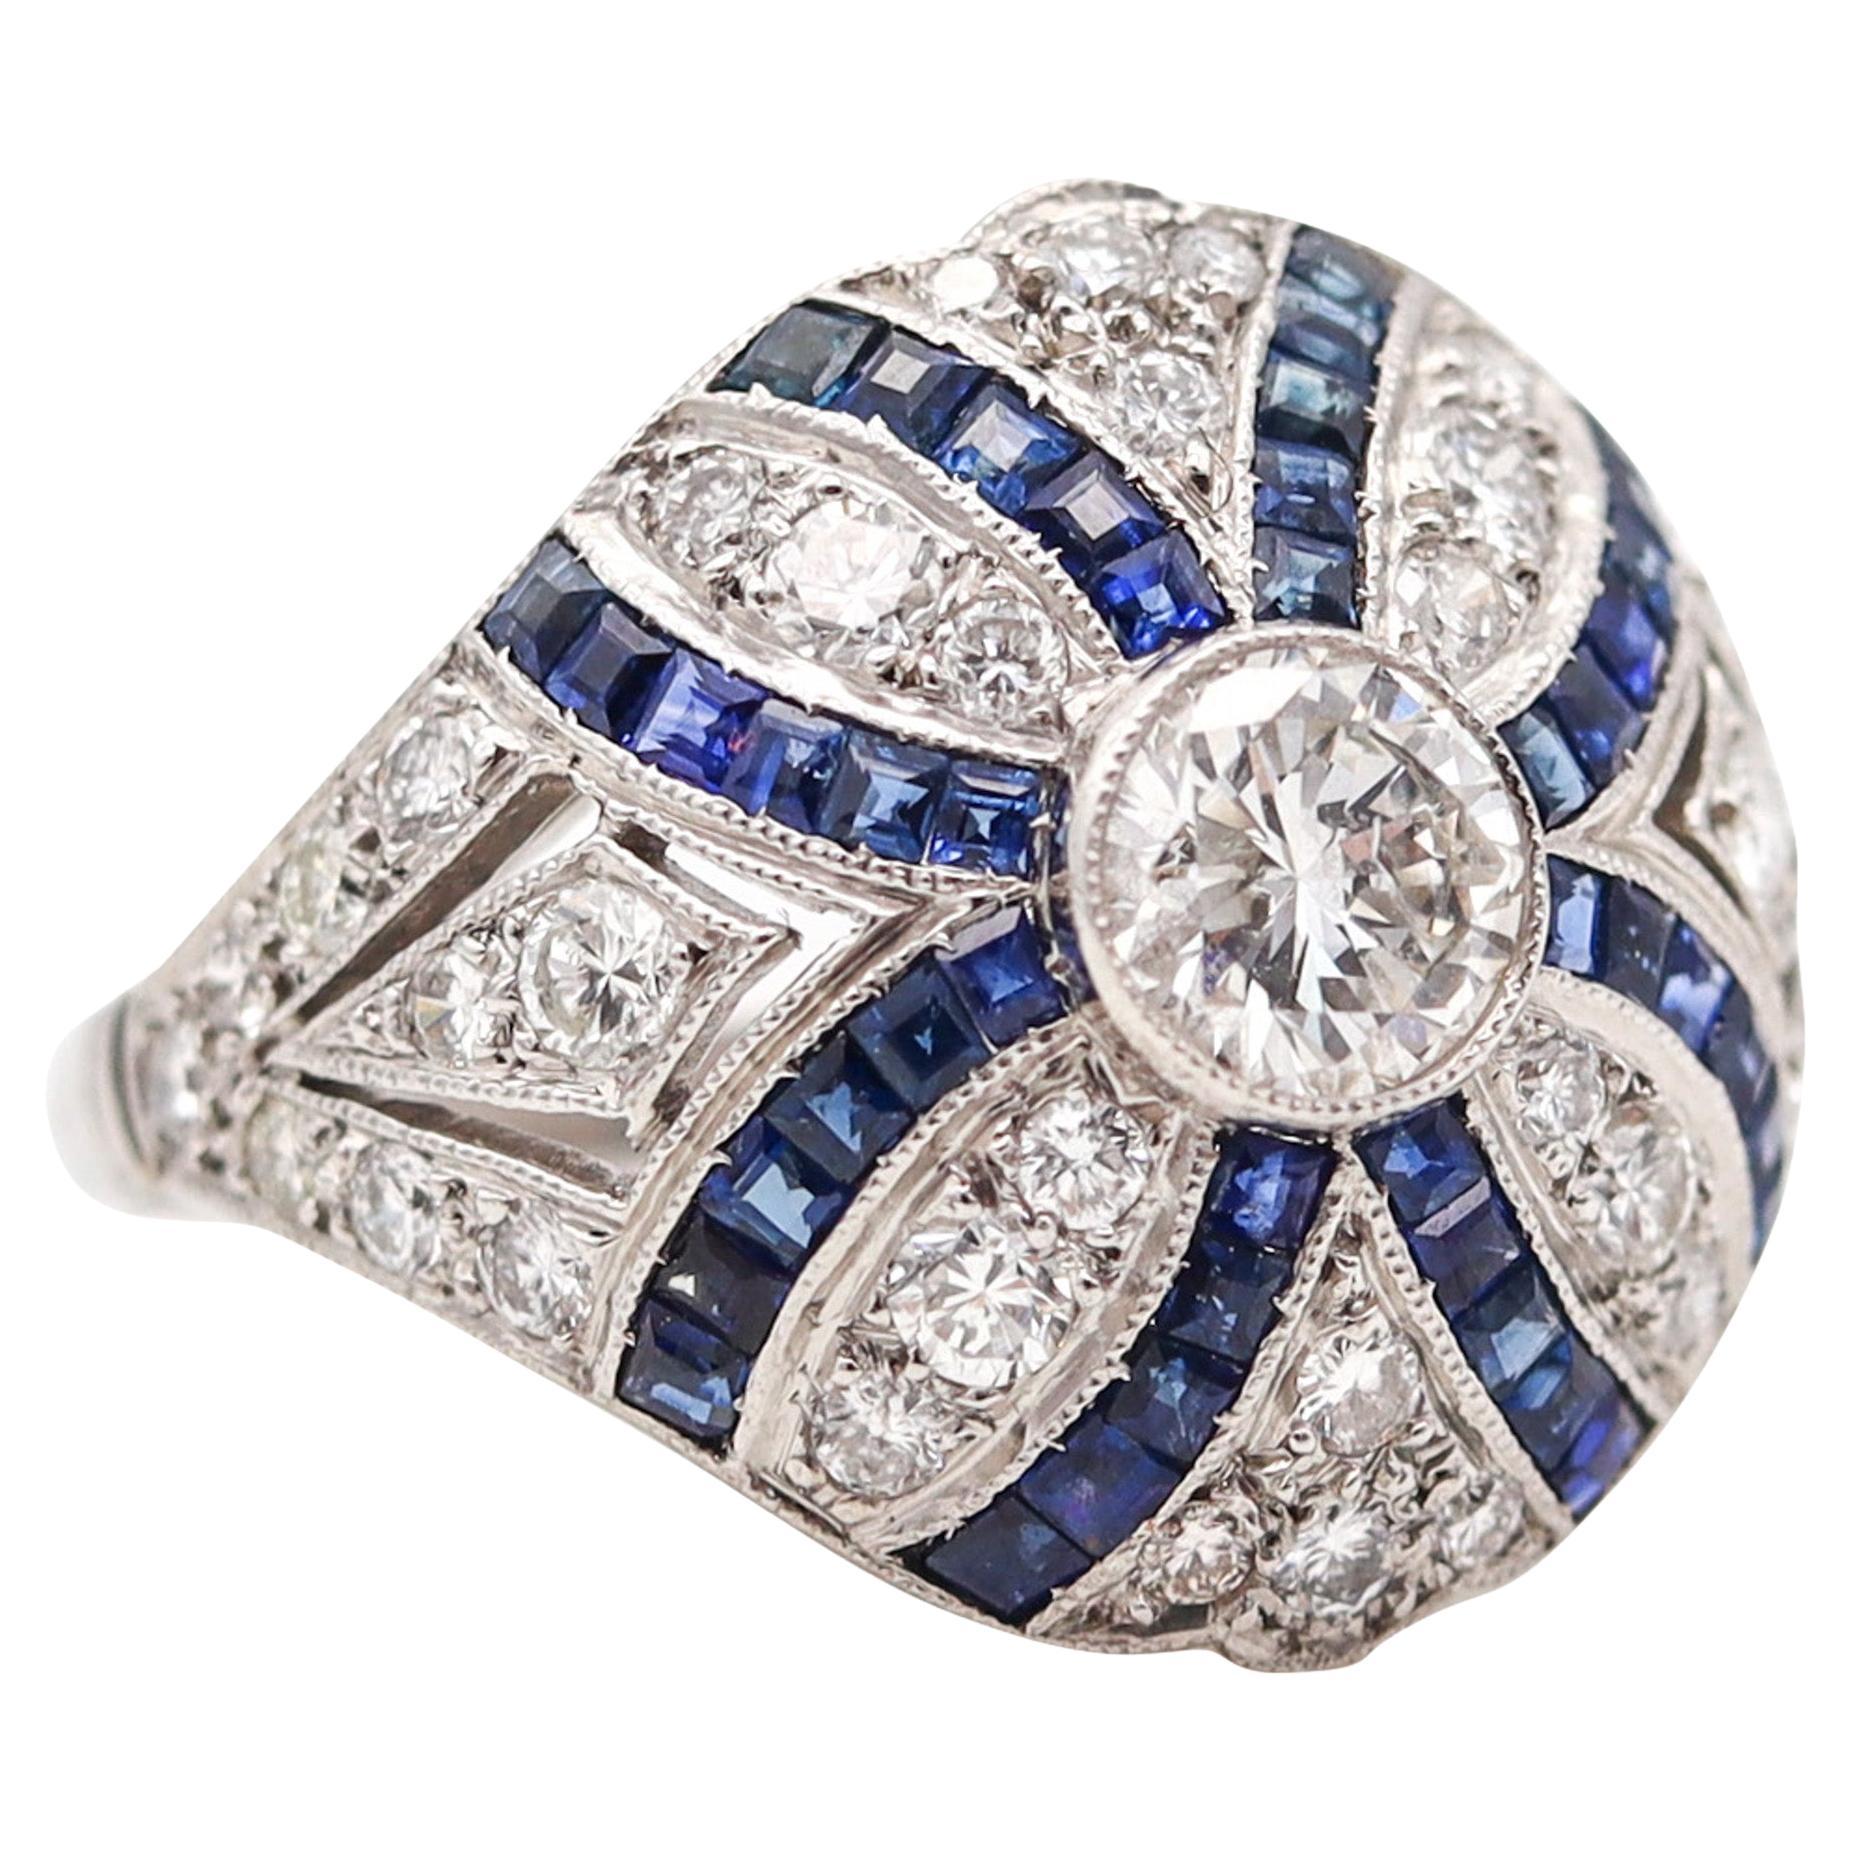 Art Deco 1930 Bombe Ring In Platinum With 3.04 Ctw In Diamonds And Sapphires